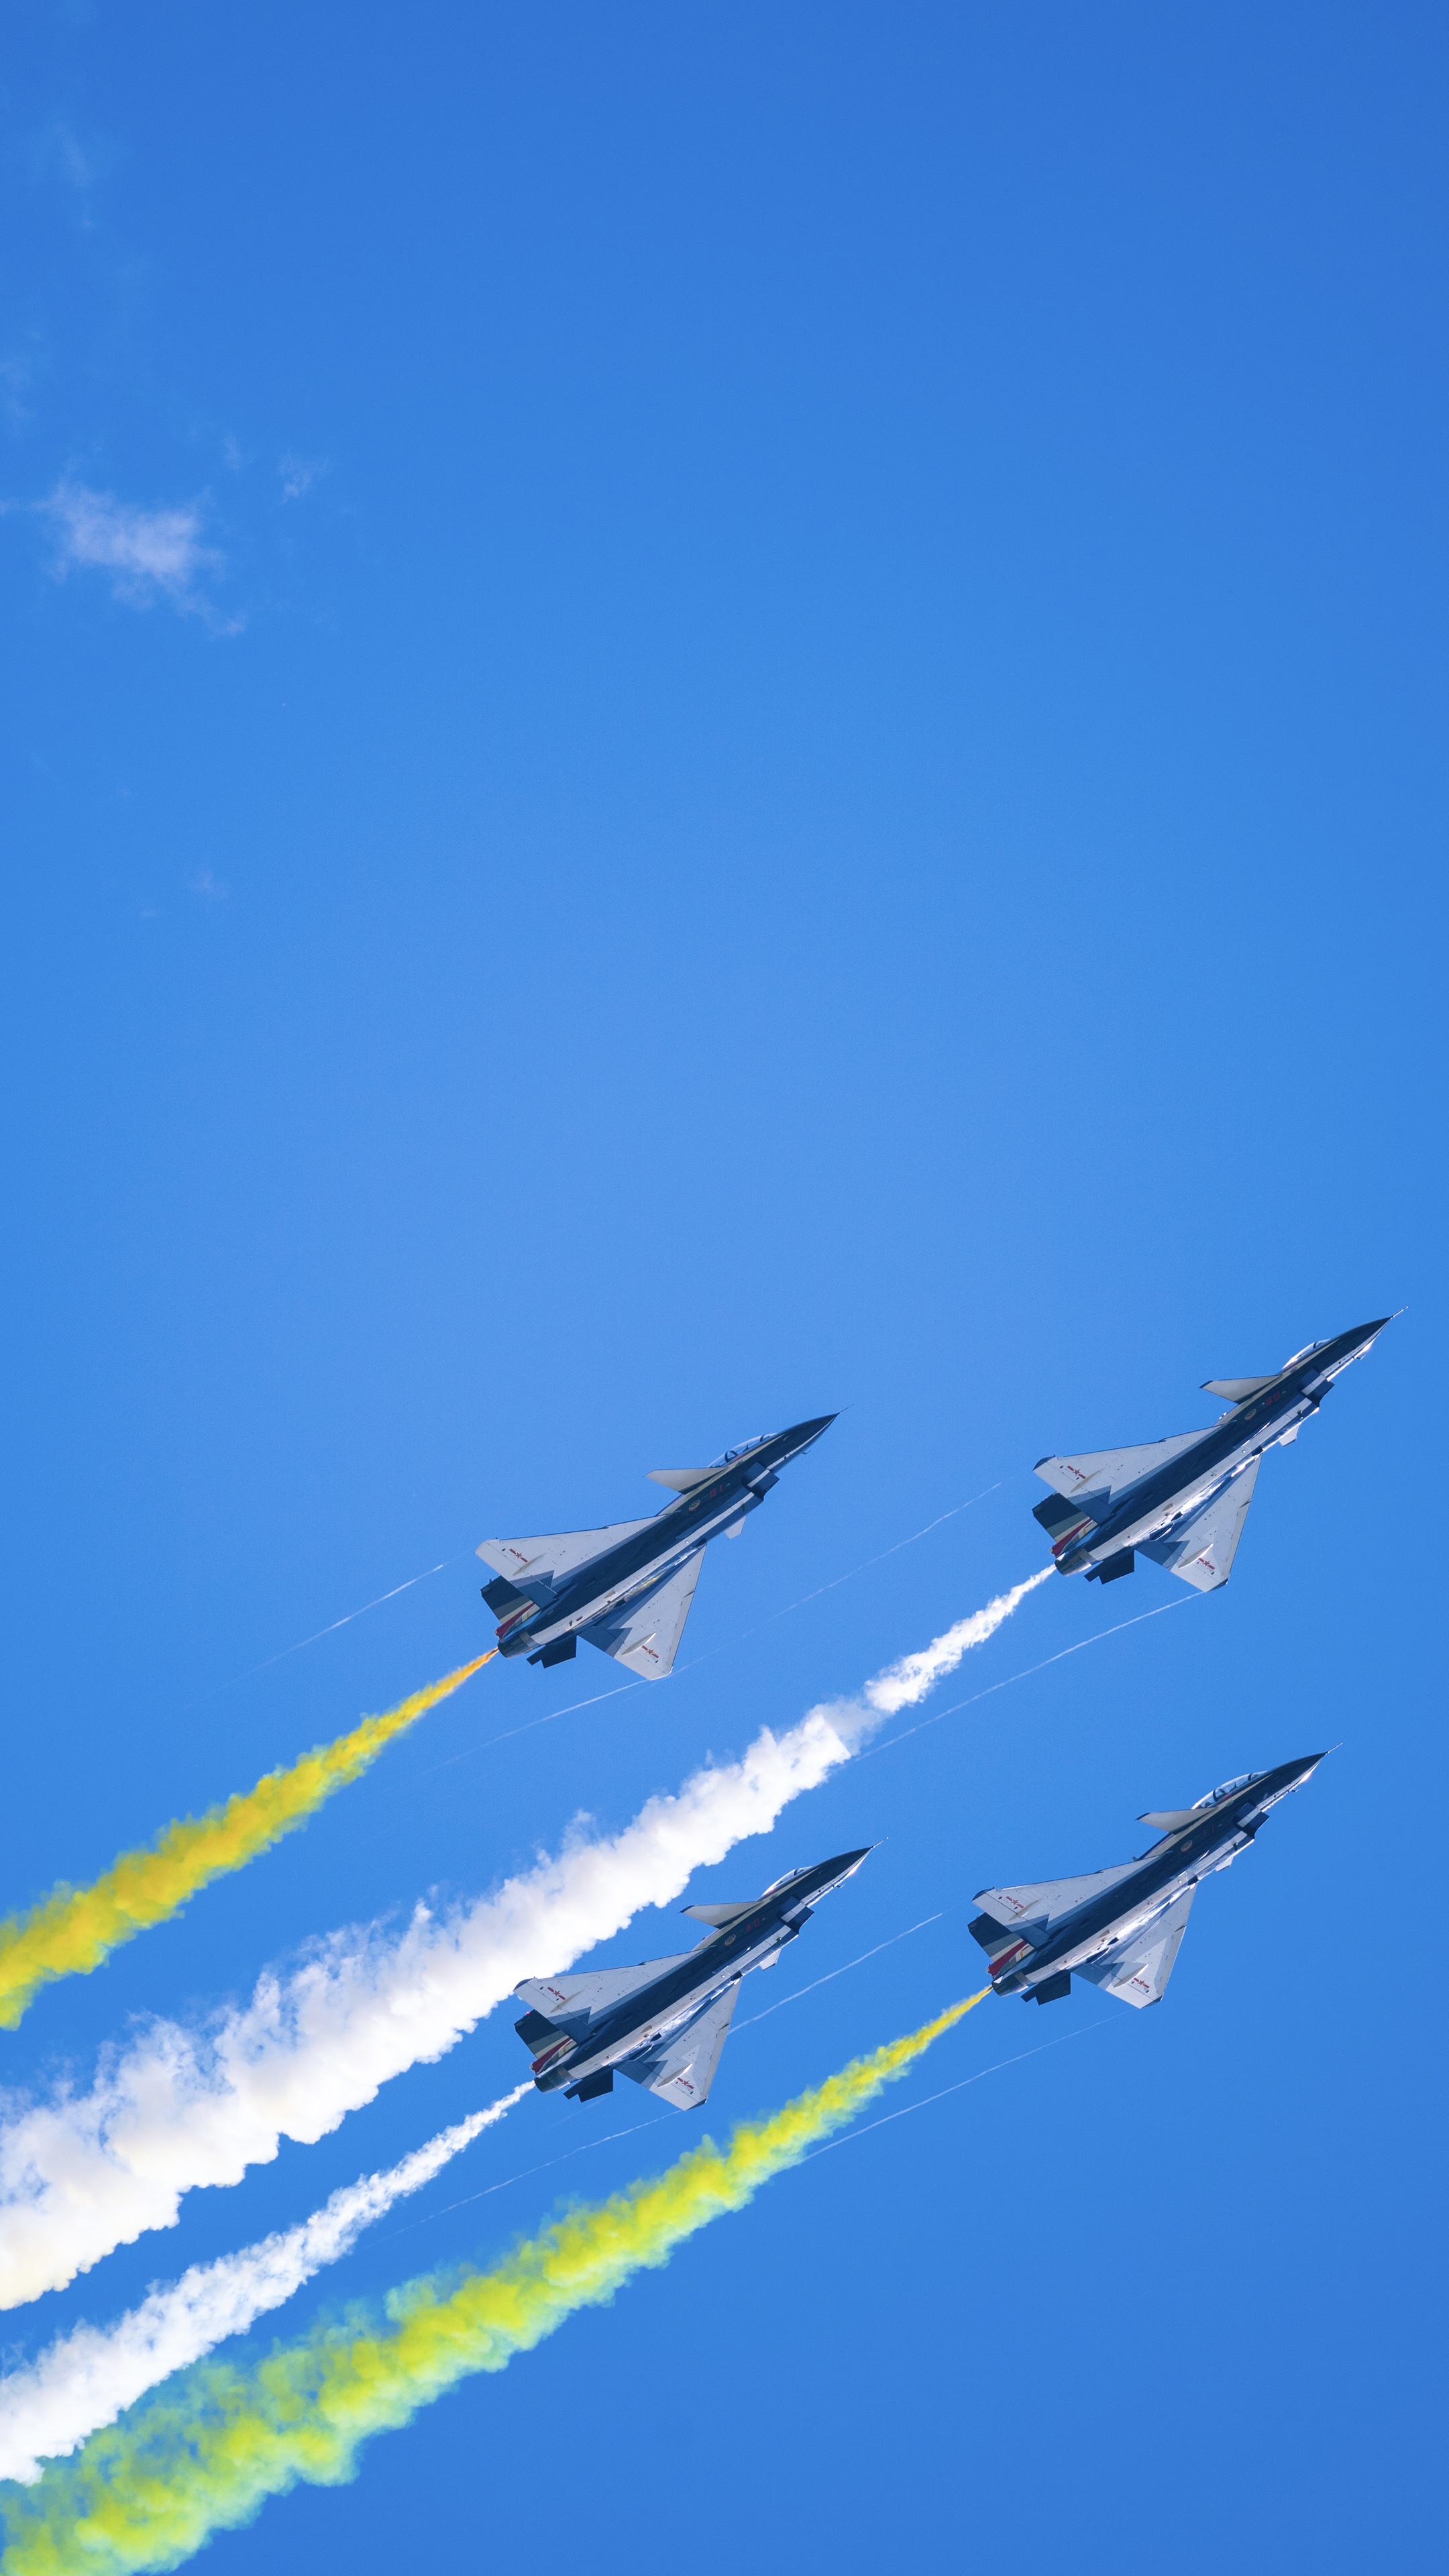 General 2160x3840 PLAAF military aircraft military vehicle vehicle flying aircraft sky clouds jet fighter chengdu J-10 Formation aerobatic team colored smoke August 1st Aerobatics Team off-center